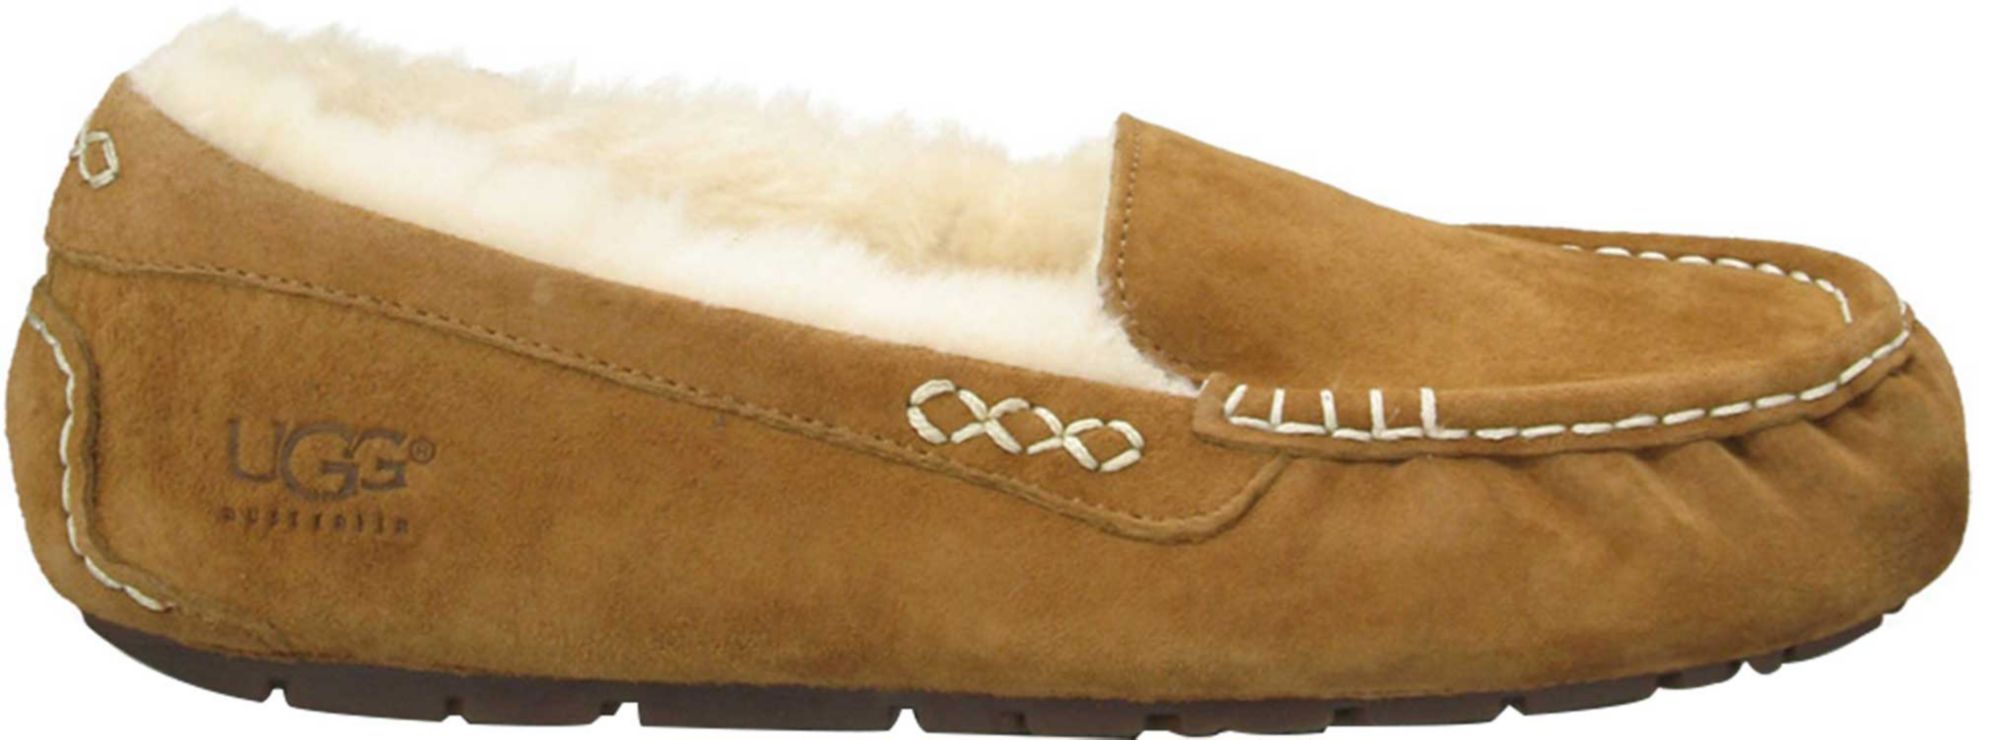 ugg slippers for sale near me